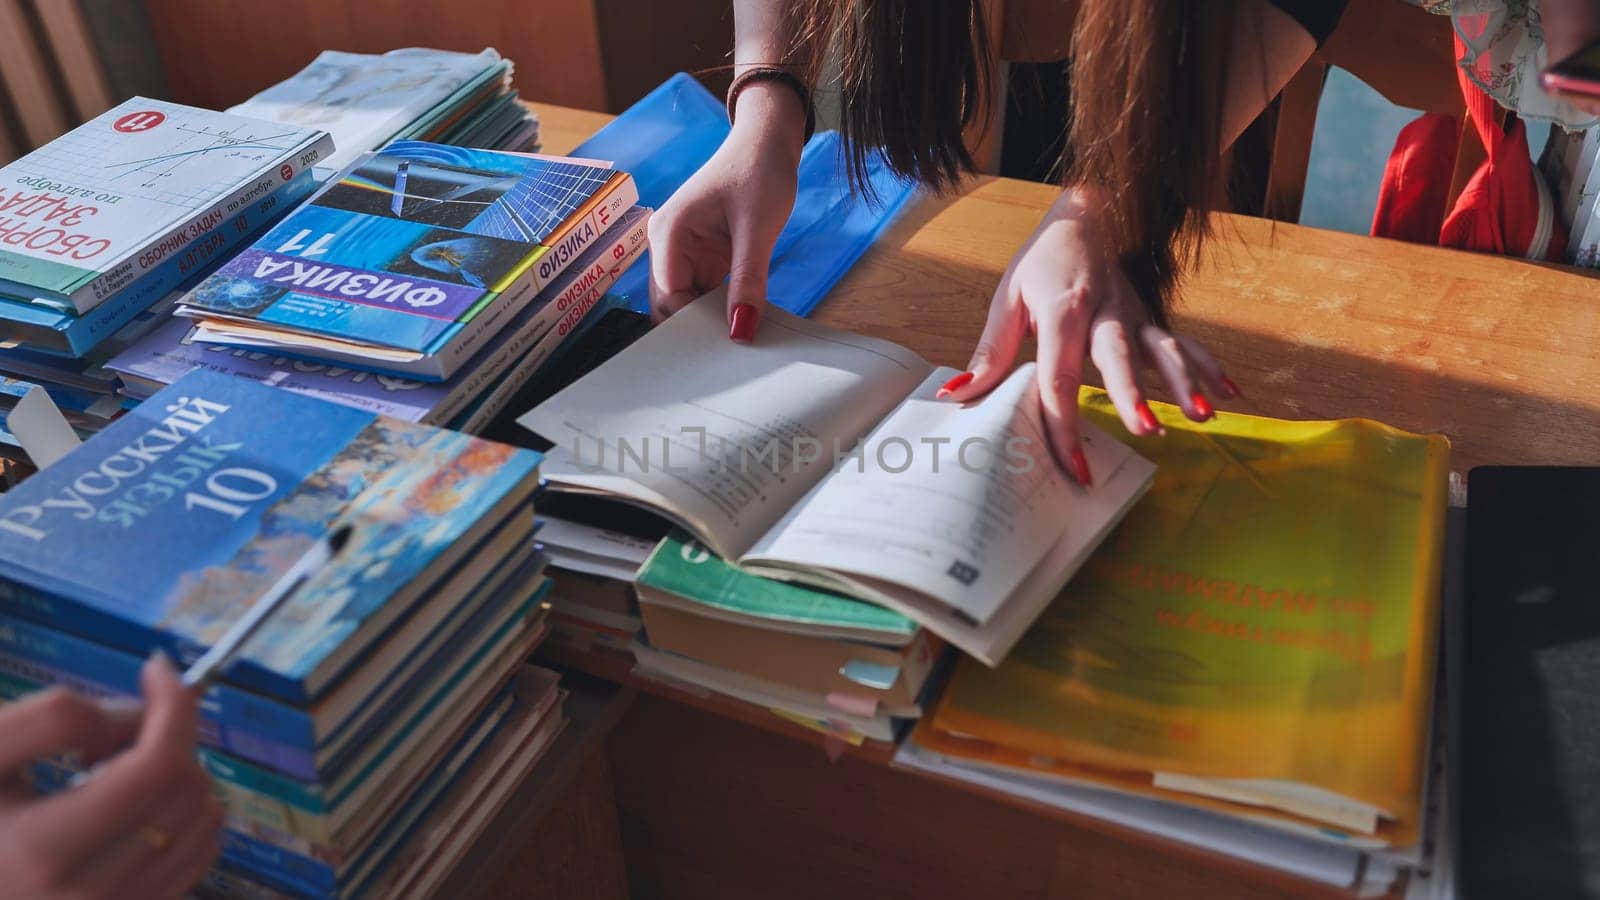 Russian students search for information in a teacher's secret book. by DovidPro